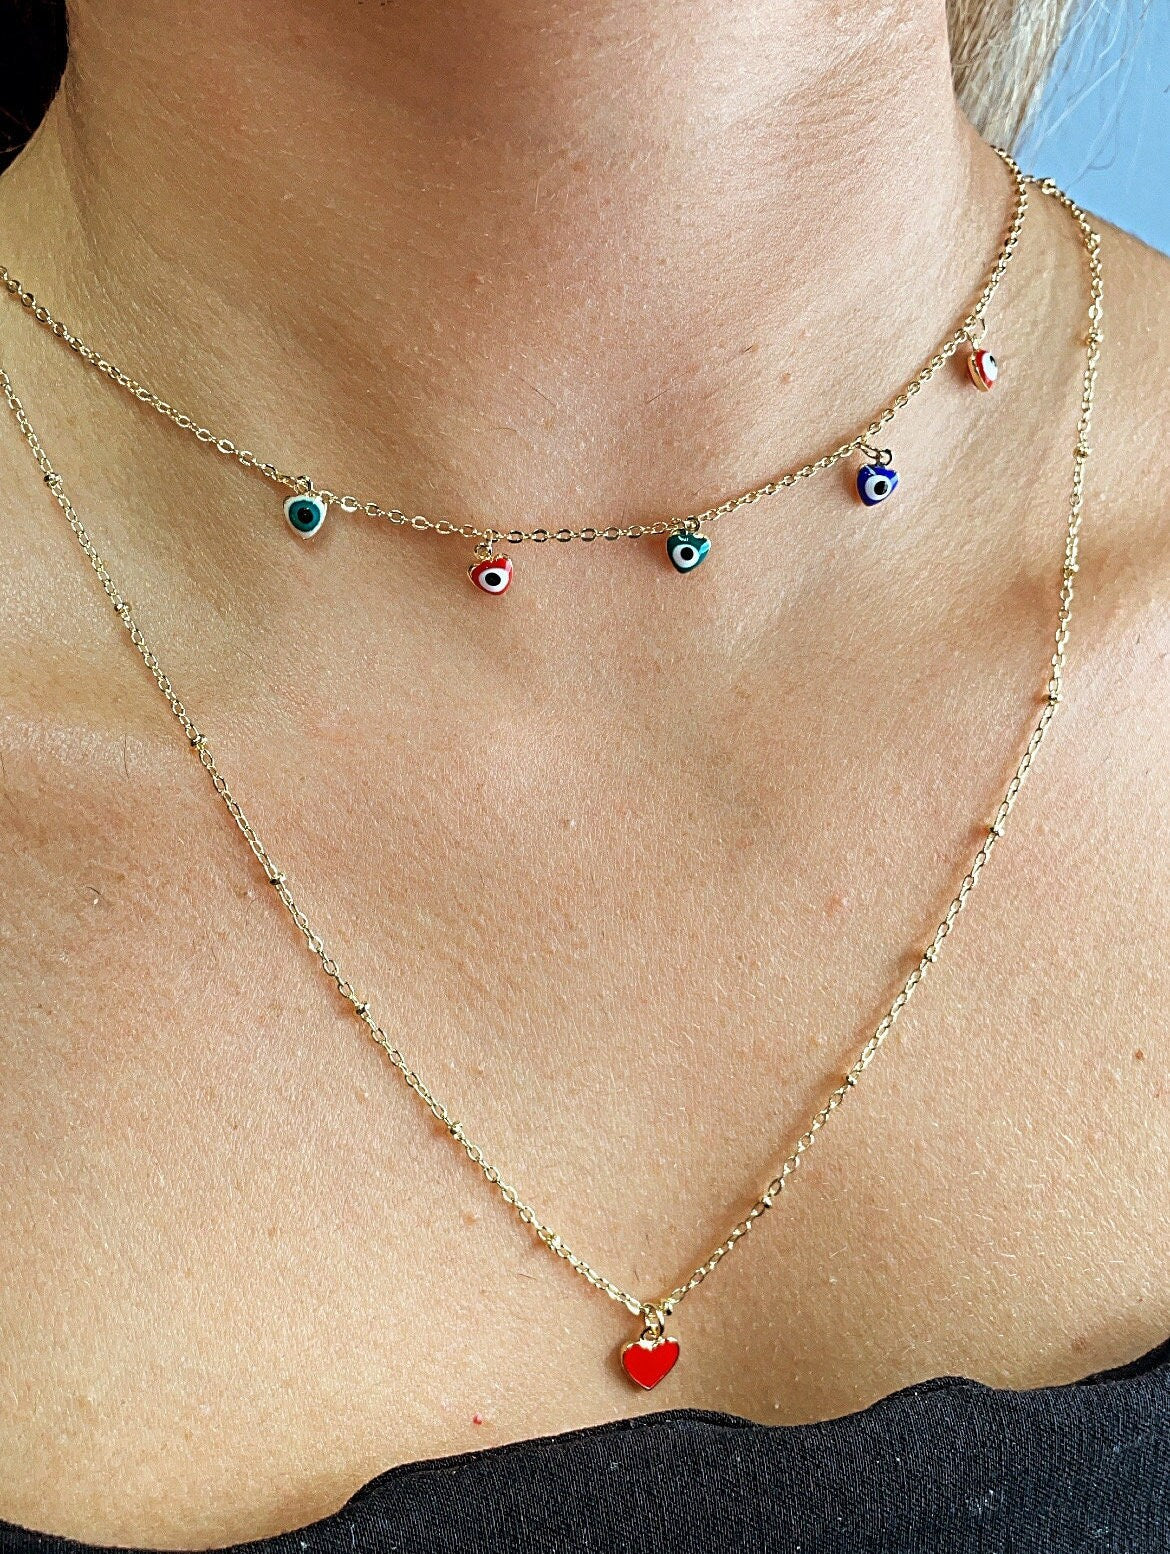 18k Gold Layered Layered Thin Satellite Chain Necklaces with 5 Colorful Evil Eyes